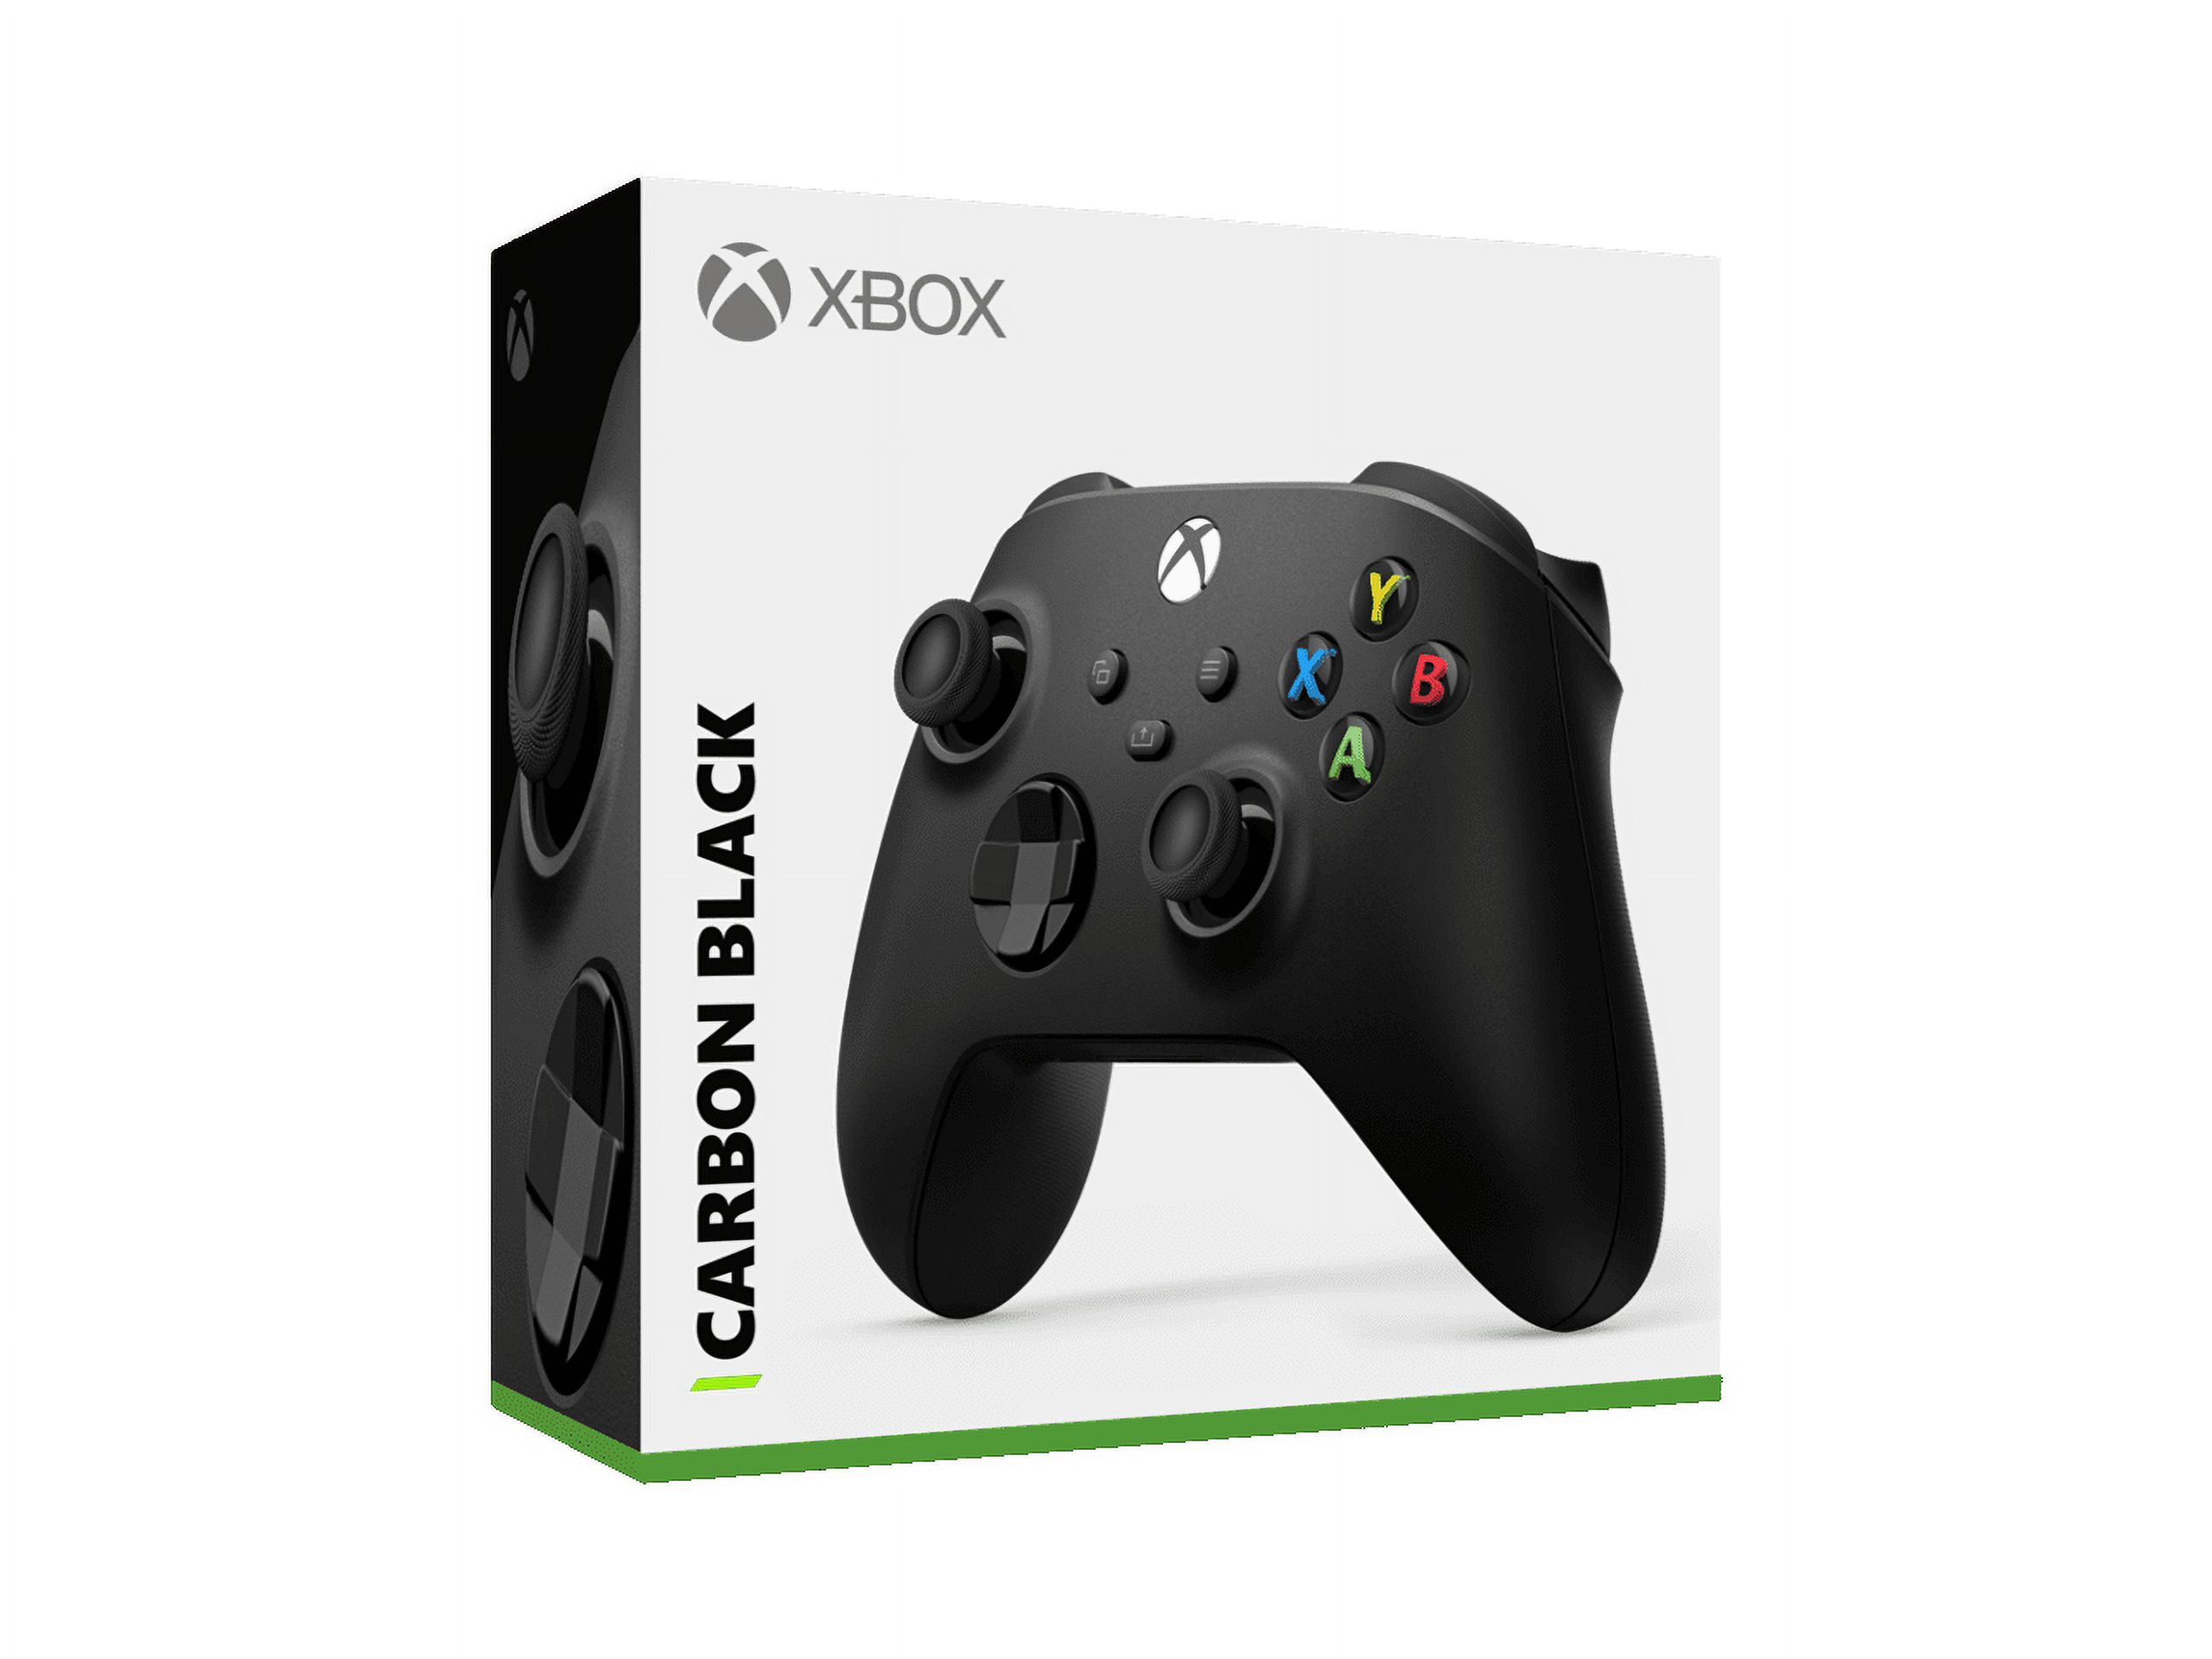 Microsoft Xbox Wireless Controller - Carbon Black - image 3 of 5